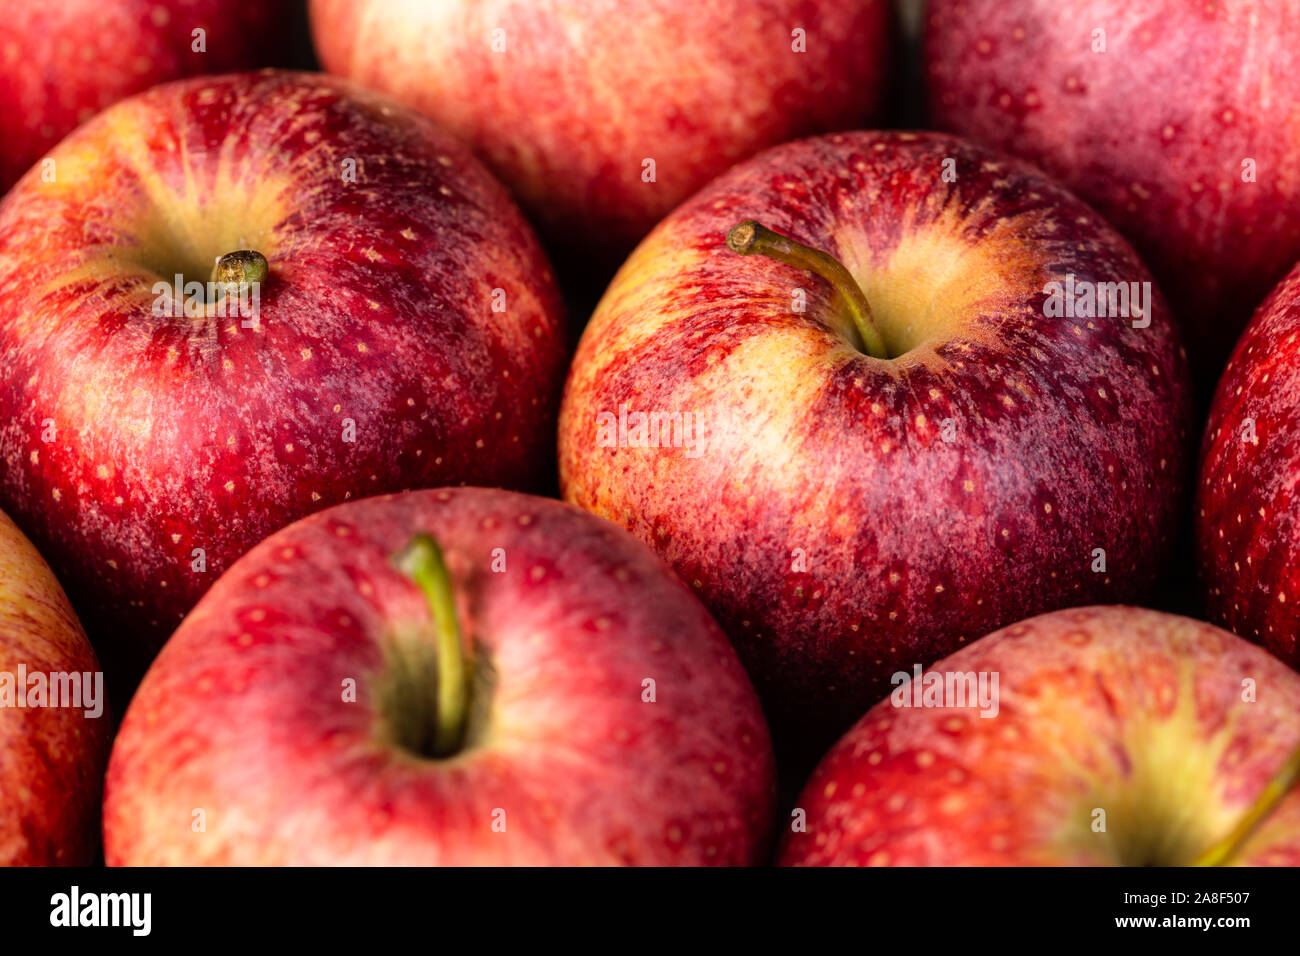 Close-up of red apples Stock Photo